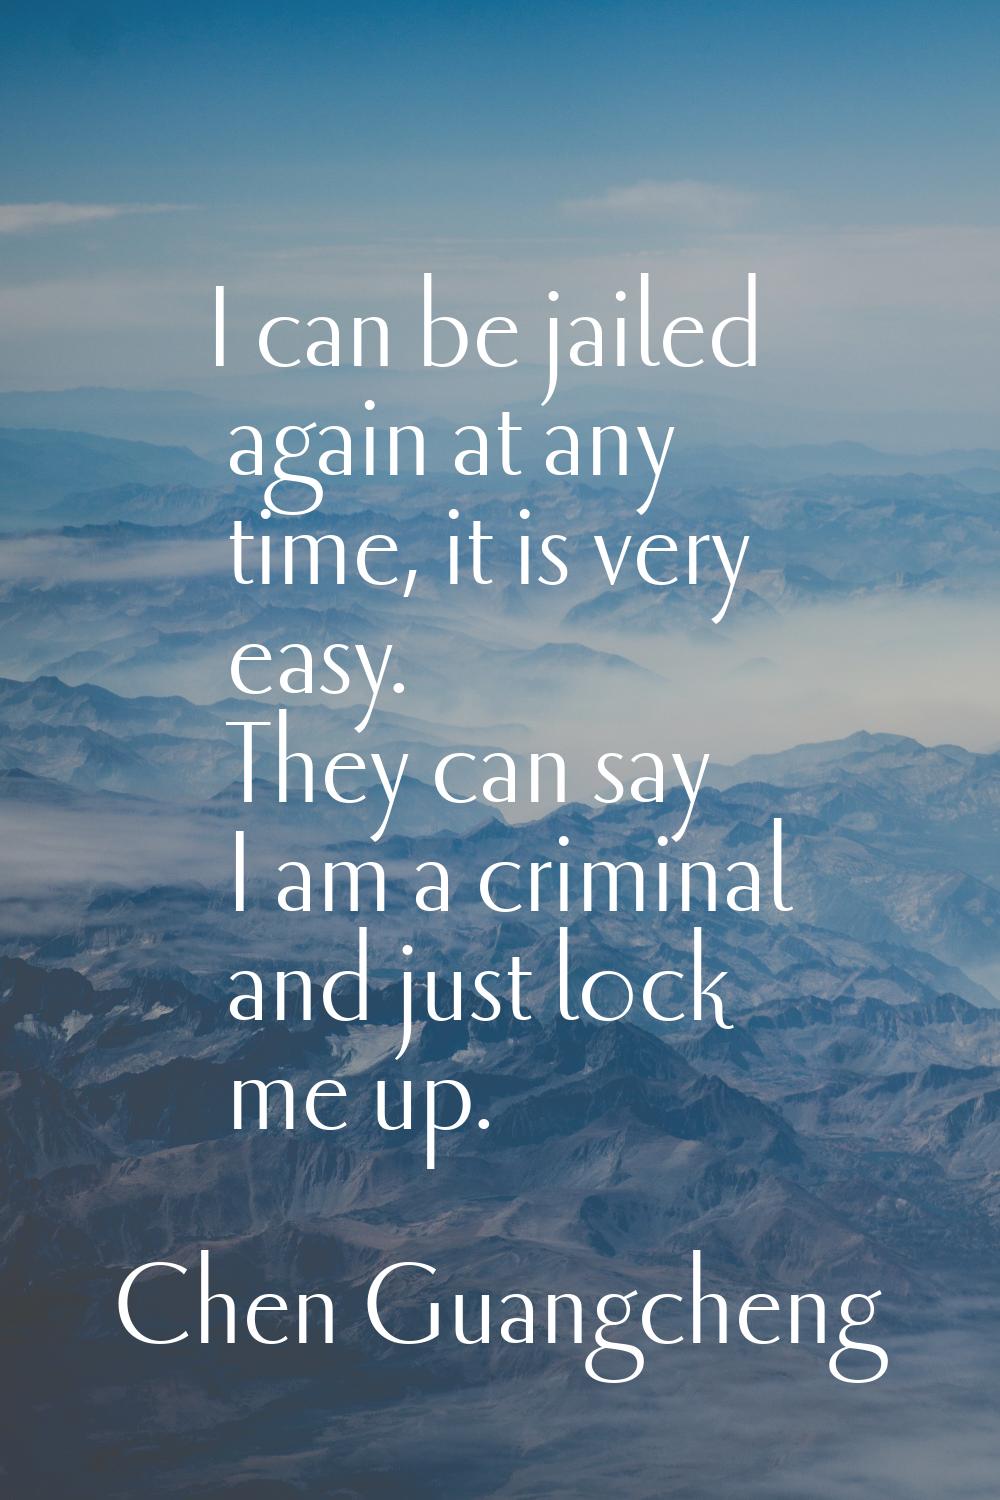 I can be jailed again at any time, it is very easy. They can say I am a criminal and just lock me u